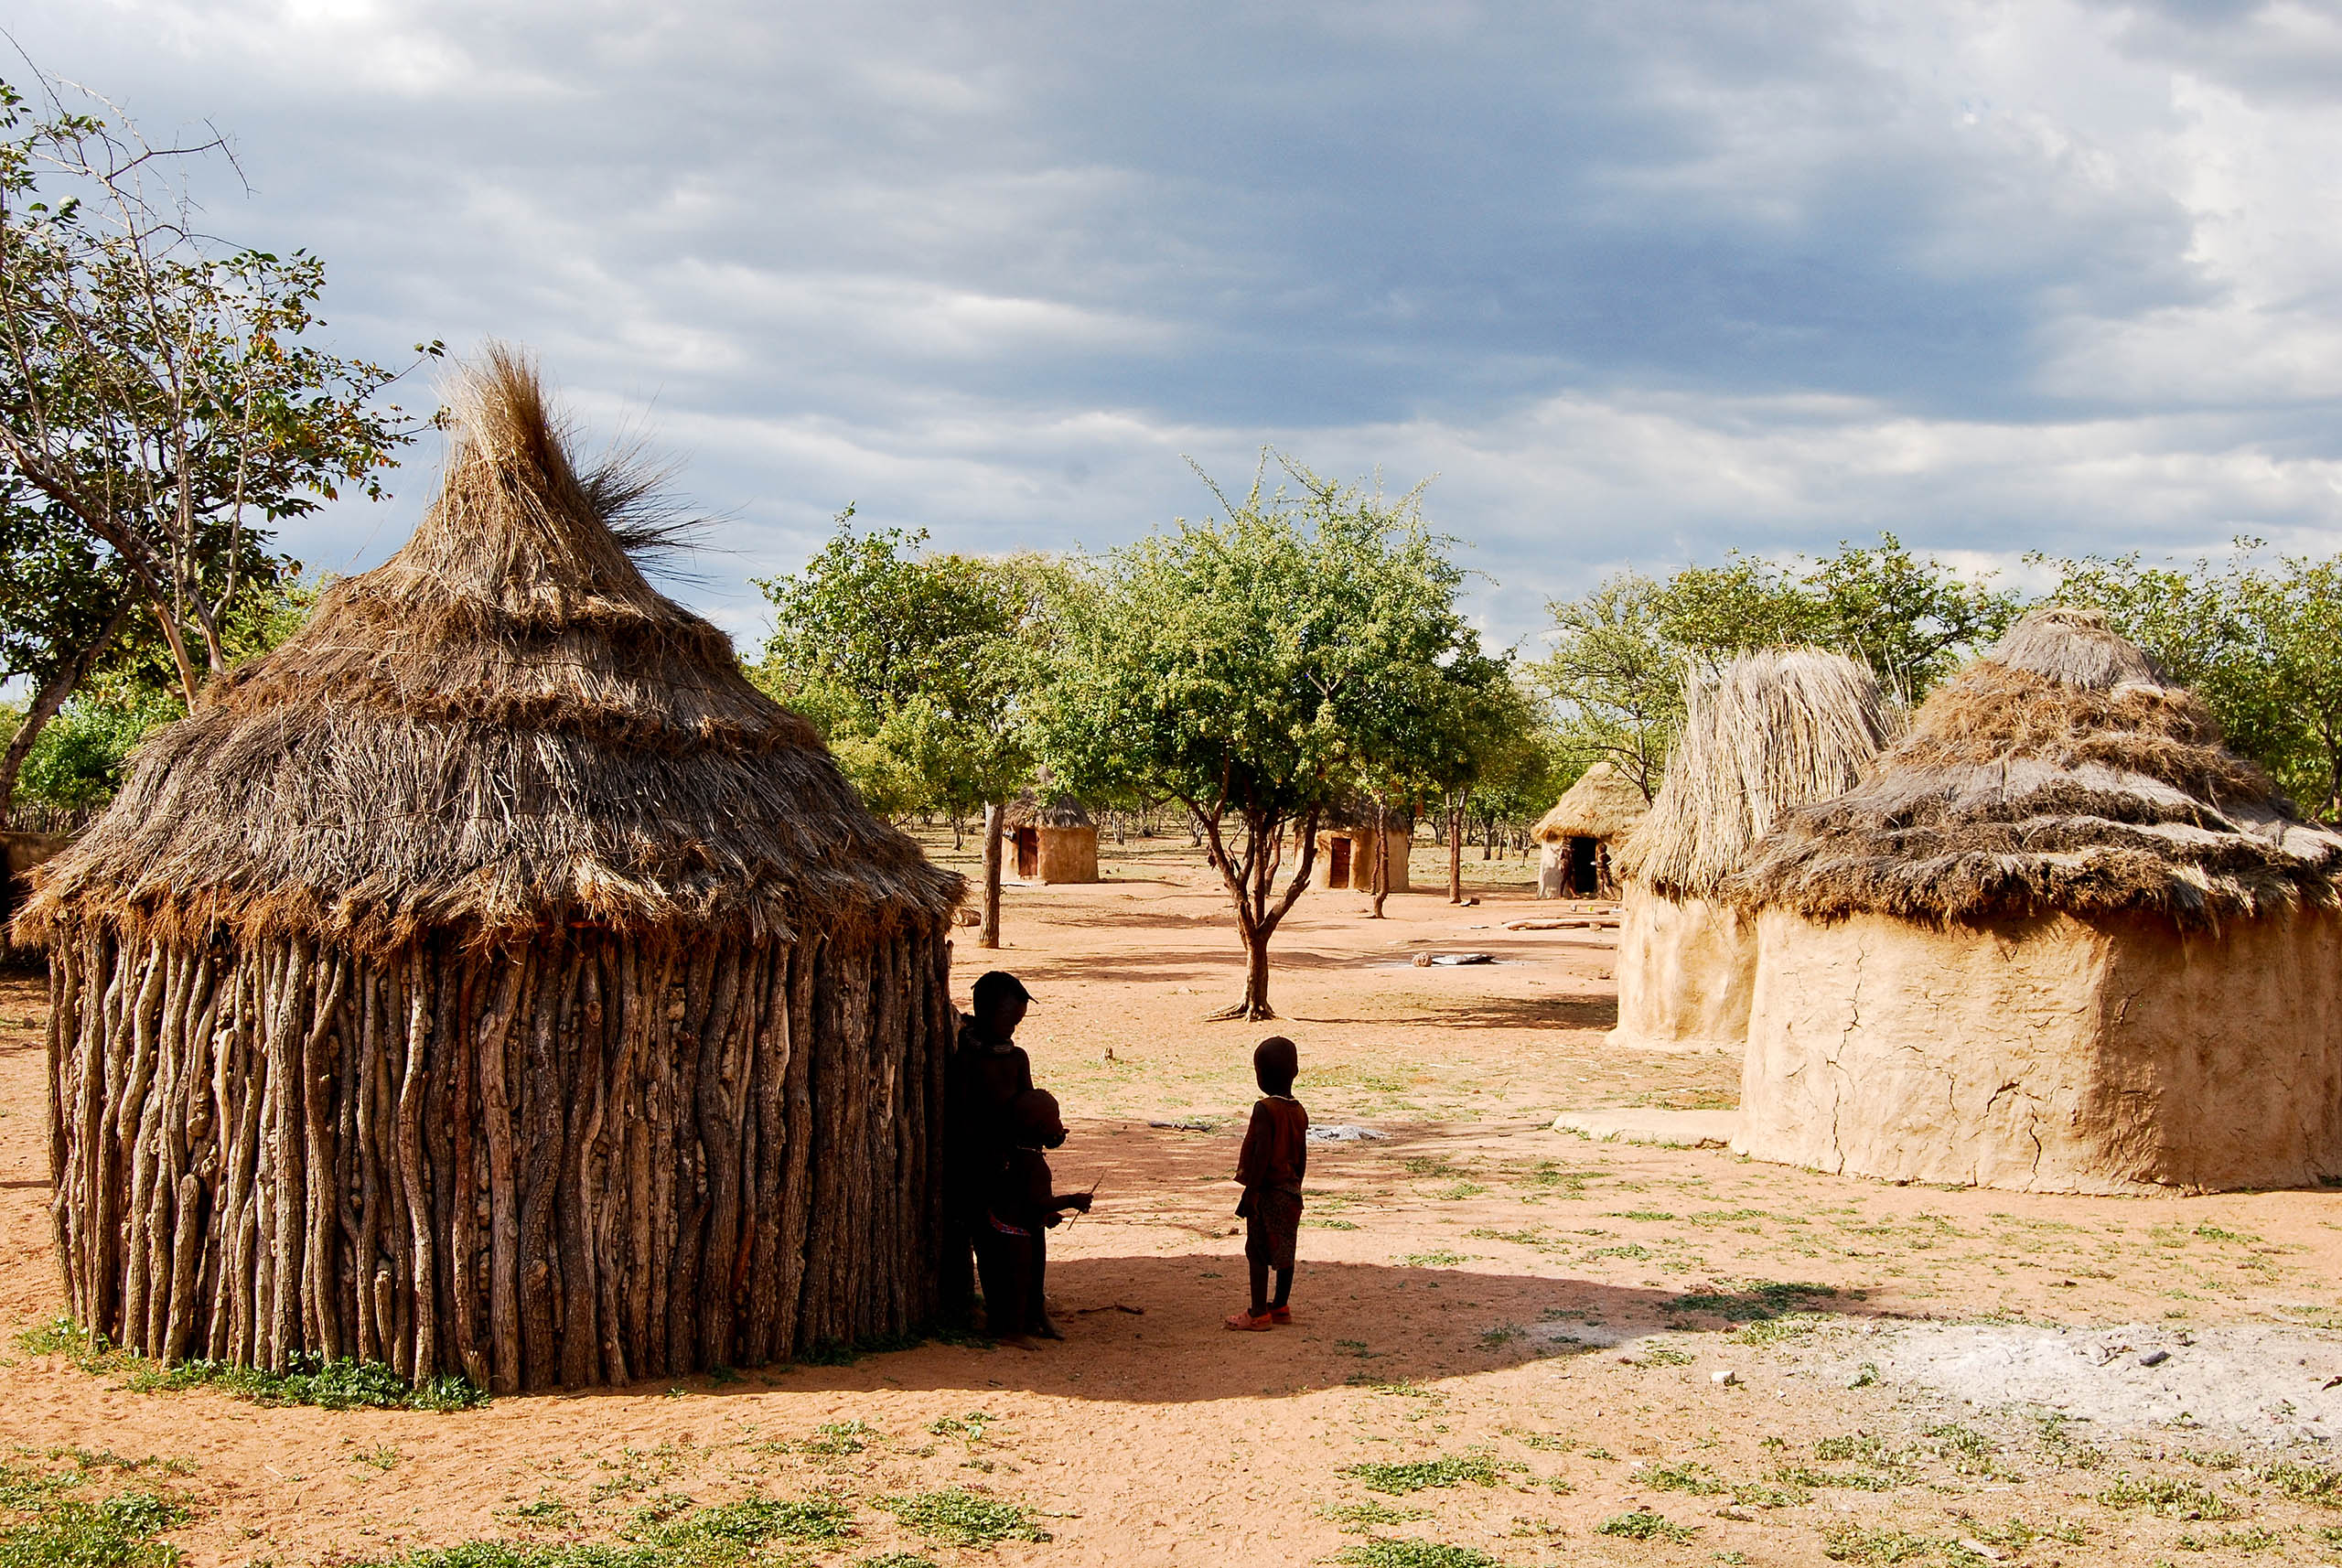 Himba village with traditional huts near Etosha National Park in Namibia, Africa